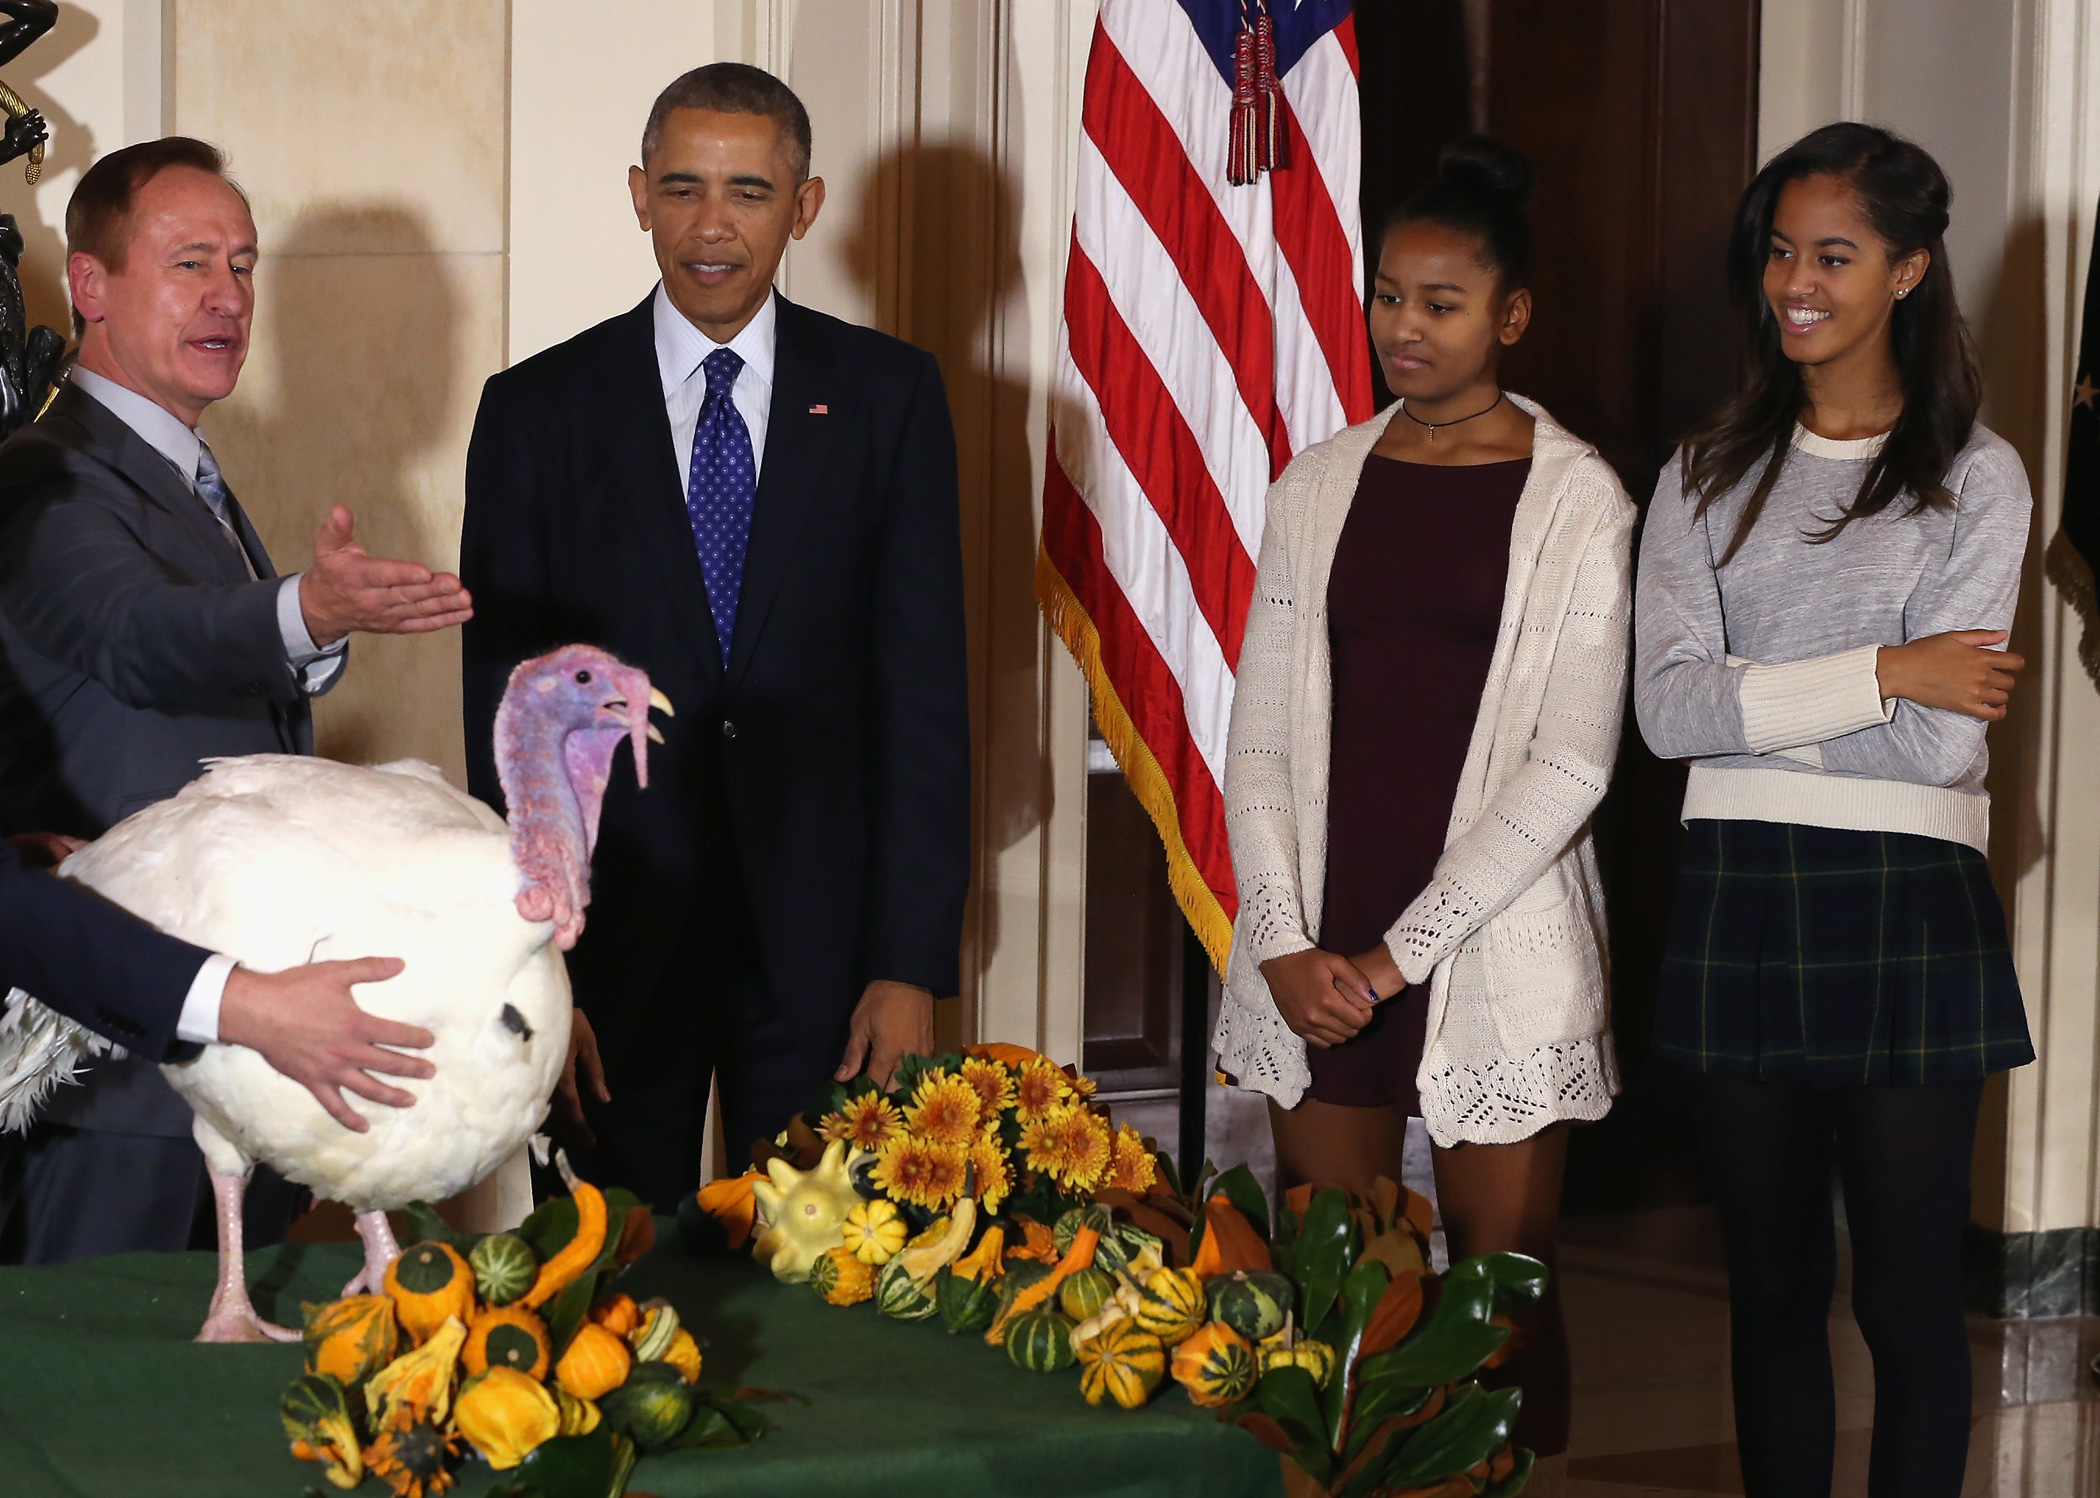 Nov. 26, 2014 President Barack Obama pardoned "Cheese" the Turkey, as his daughters Malia and Sasha watch a ceremony at the White House.